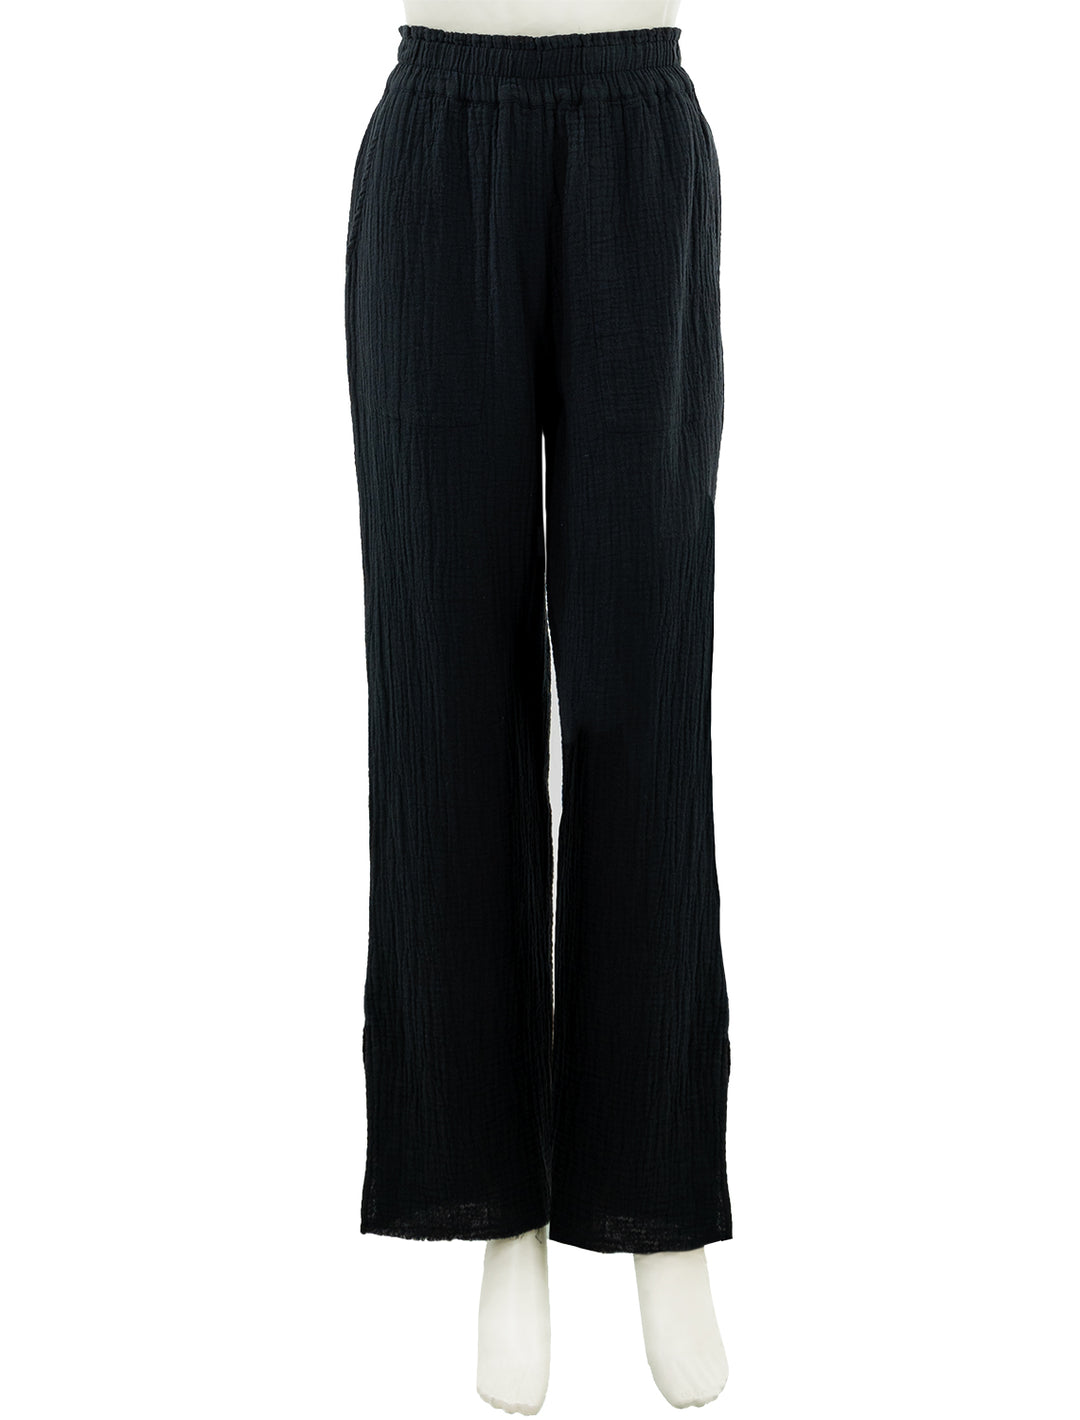 Front view of Rails' leon pant in black.